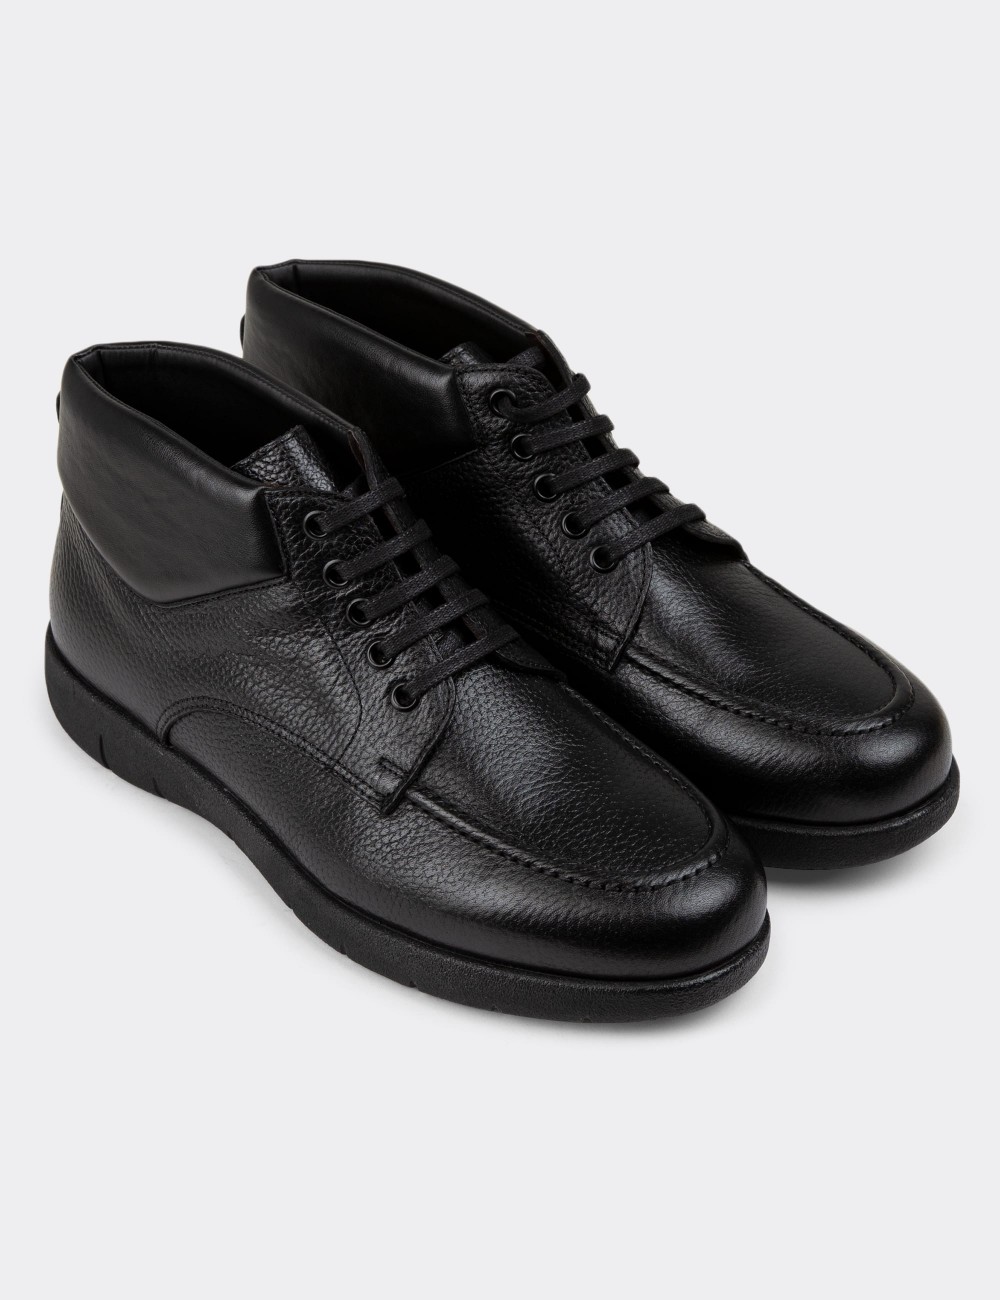 Black Leather Boots - 01928MSYHC01